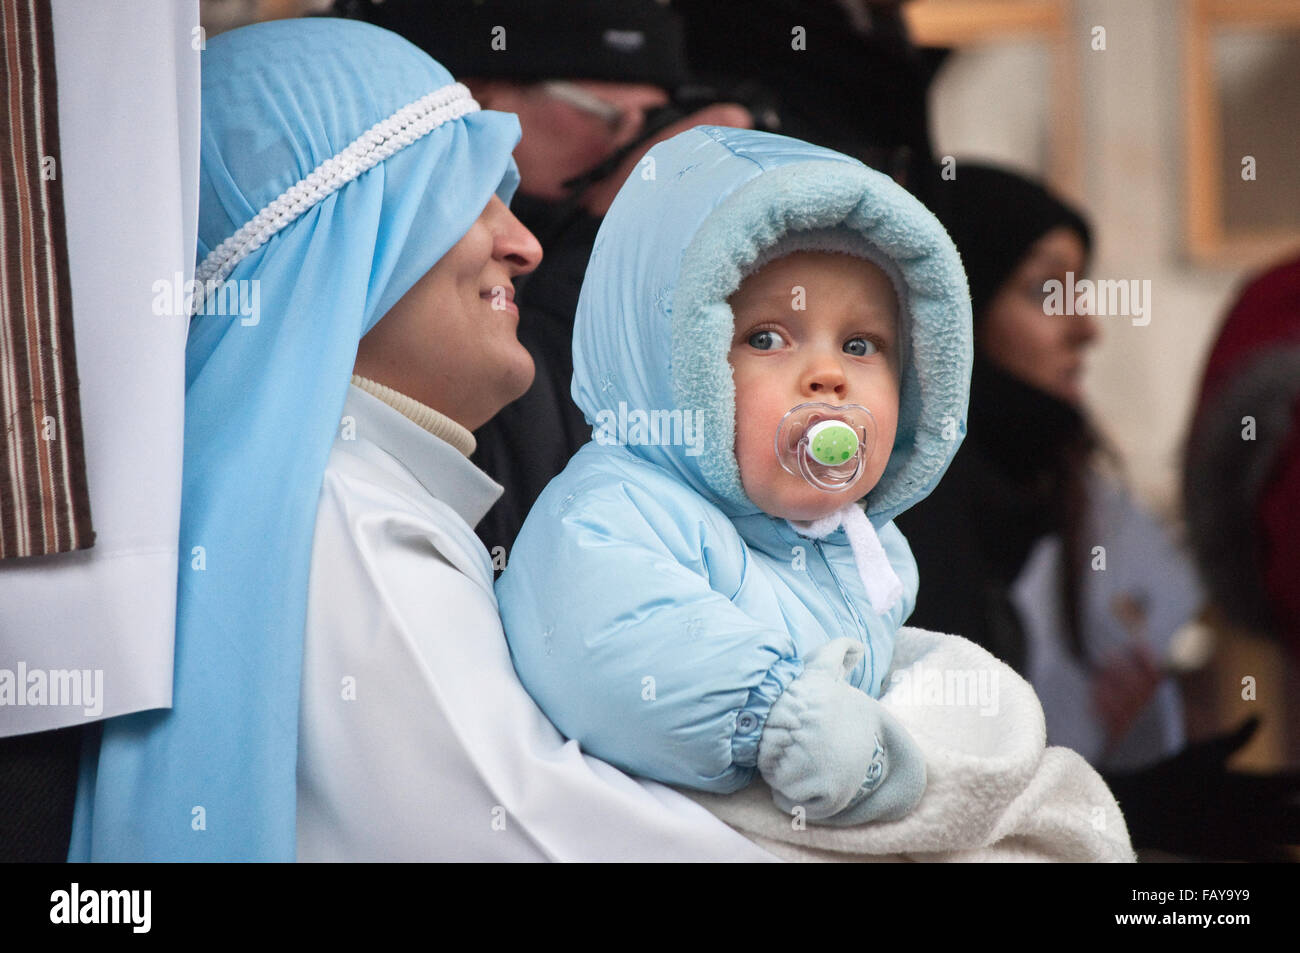 Reenactor as Virgin Mary with baby Jesus Christ,  at Epiphany Holiday celebration in Wroclaw, Lower Silesia, Poland Stock Photo